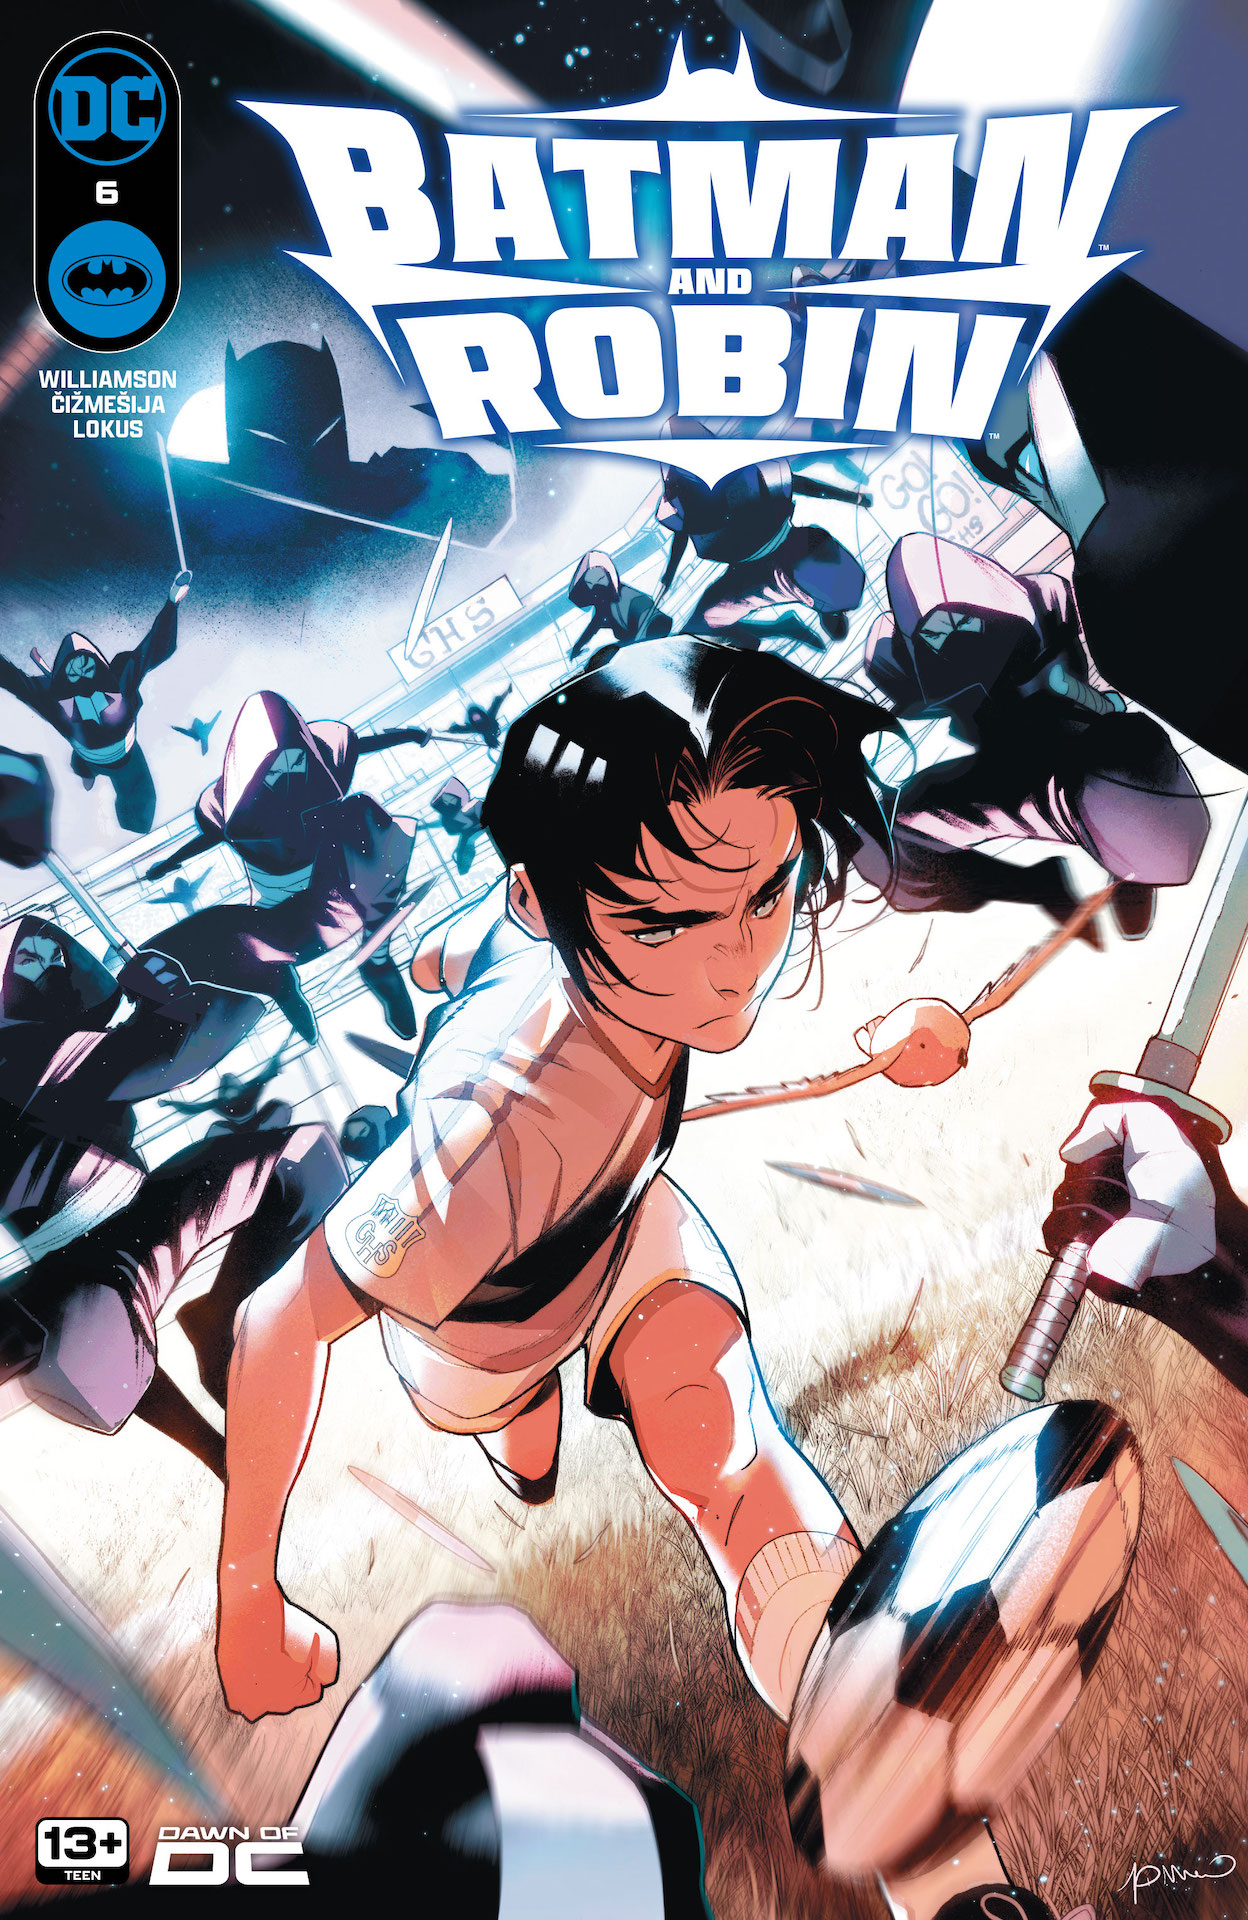 DC Preview: Batman and Robin #6